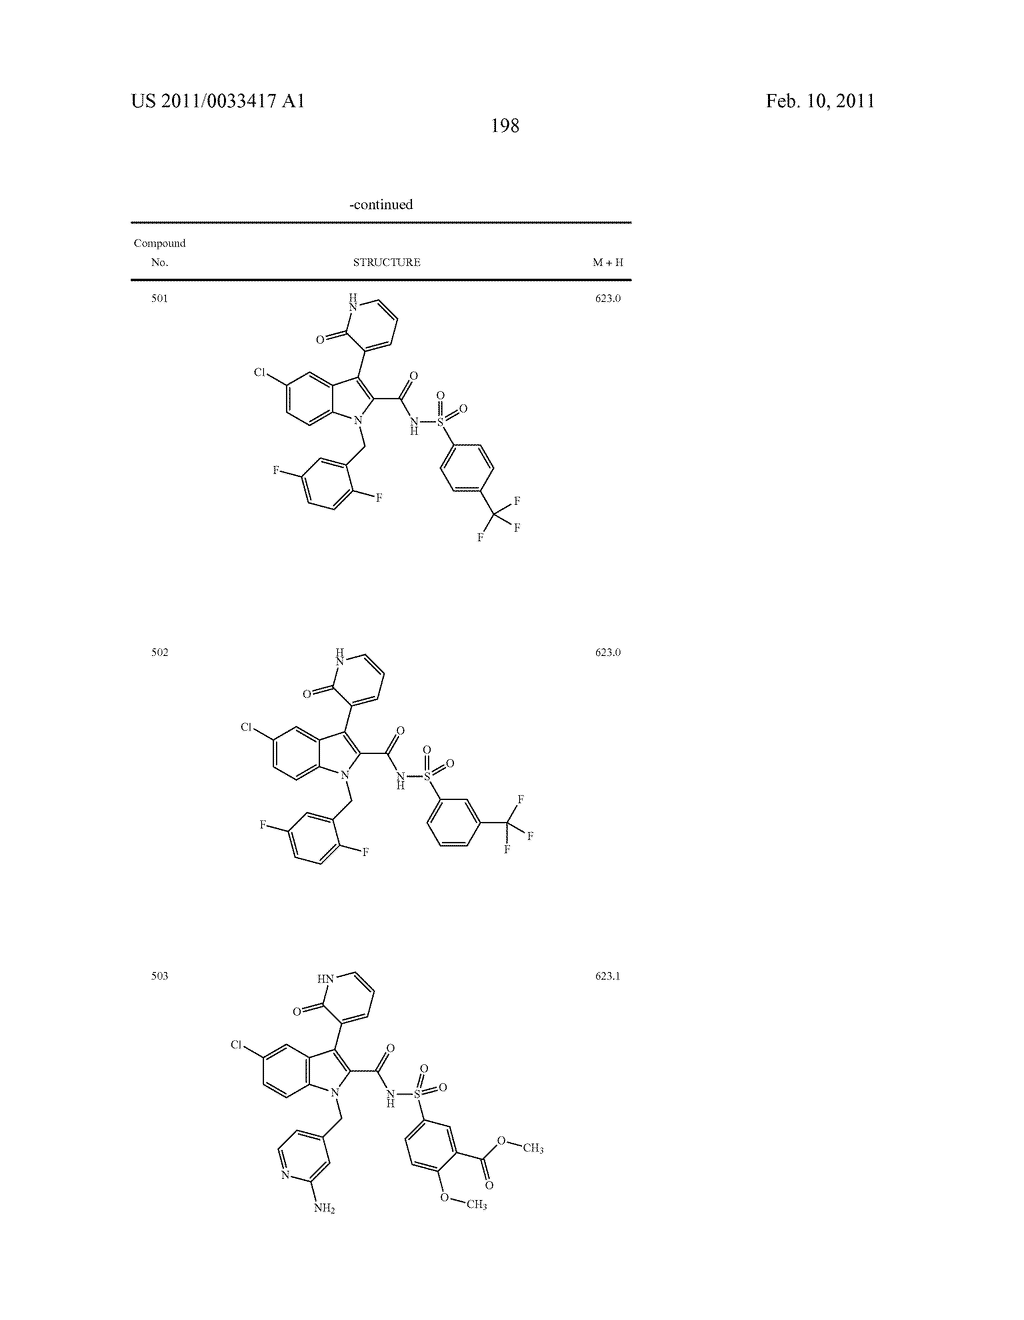 2,3-SUBSTITUTED INDOLE DERIVATIVES FOR TREATING VIRAL INFECTIONS - diagram, schematic, and image 199